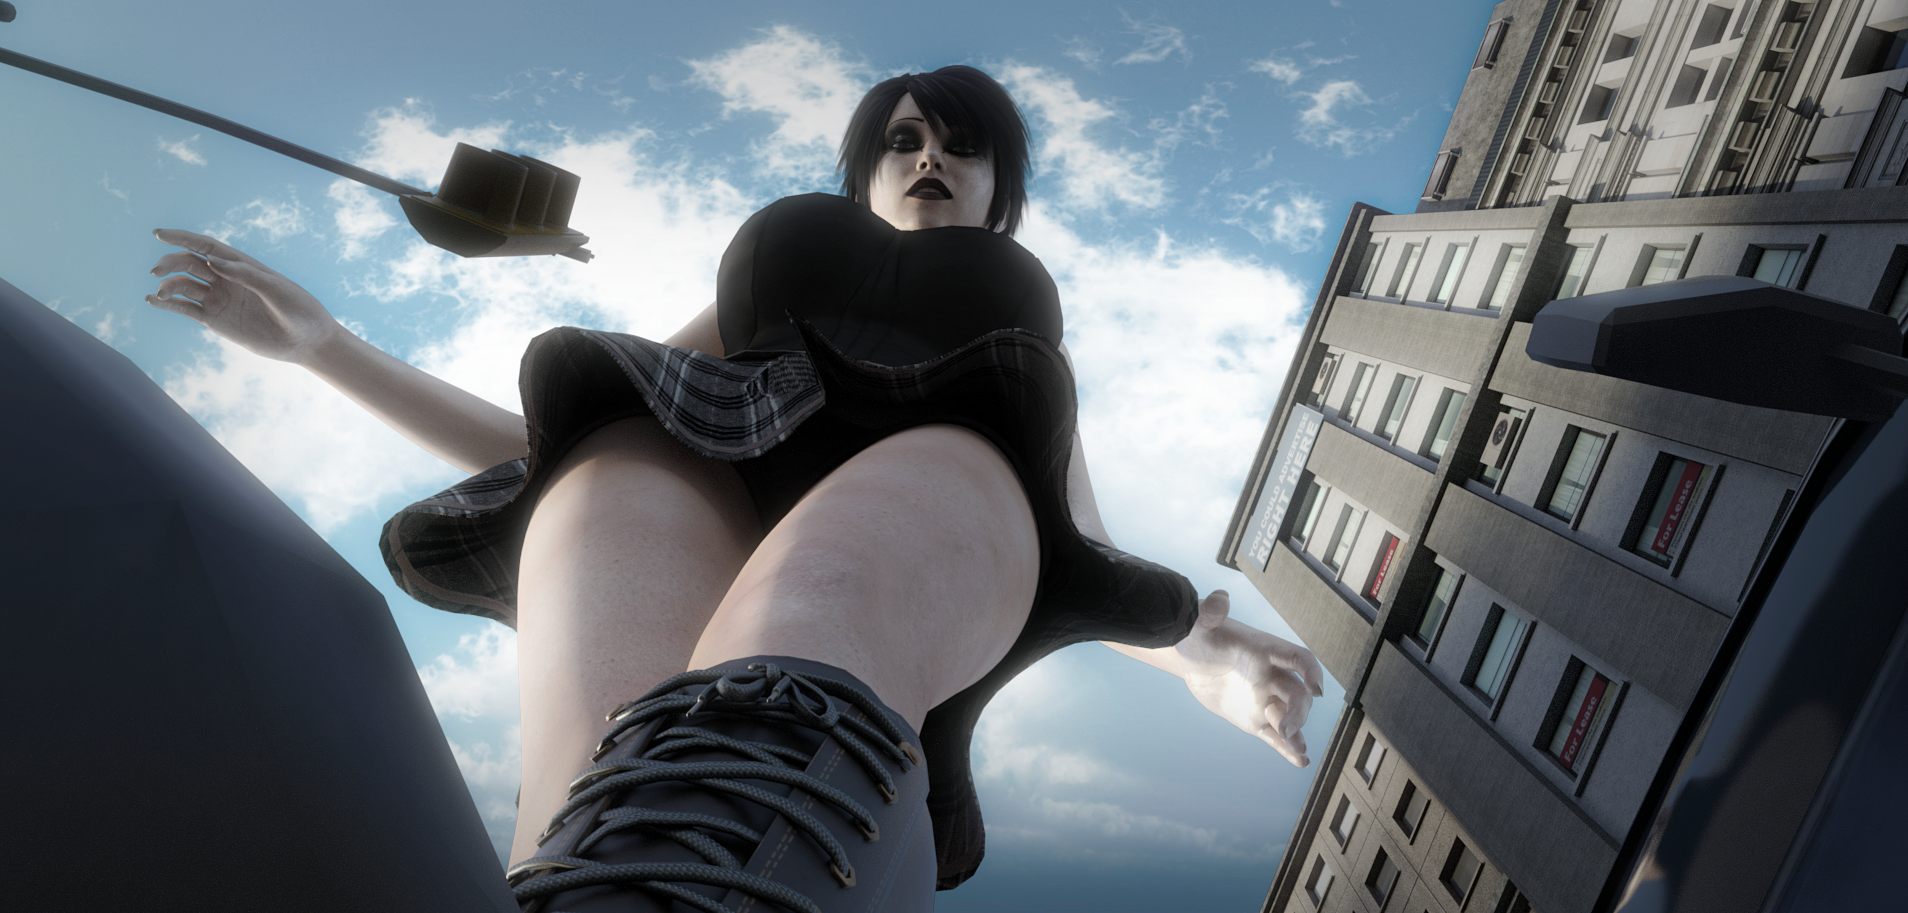 Giantess gothic babe walking the city in UnseenHarbinger Of Drenics and Horses 3D Porn Comic